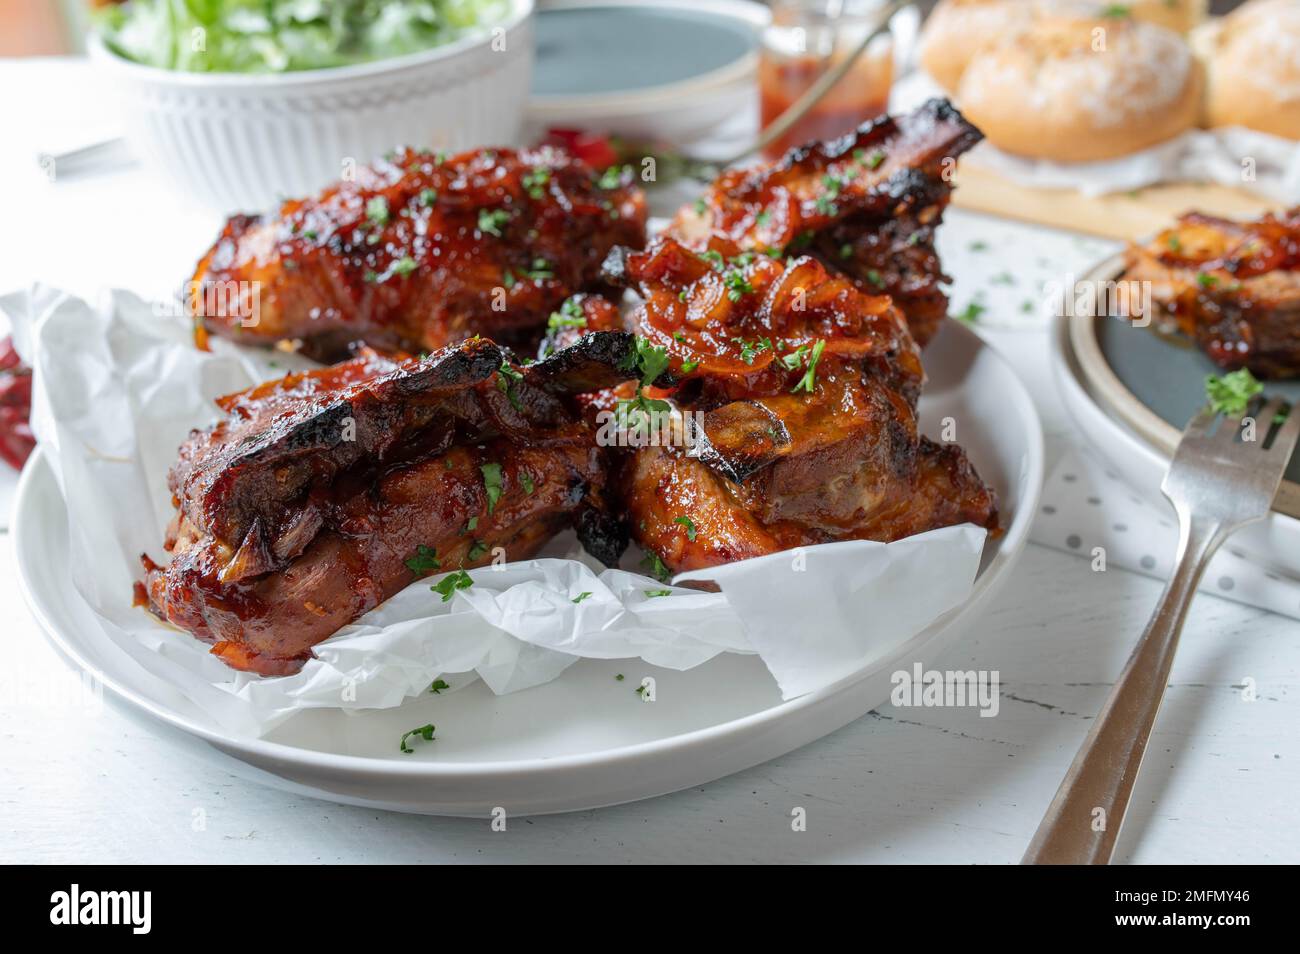 Oven baked thick pork ribs with homemade barbecue sauce, salad and bread for dinner or lunch on a table Stock Photo